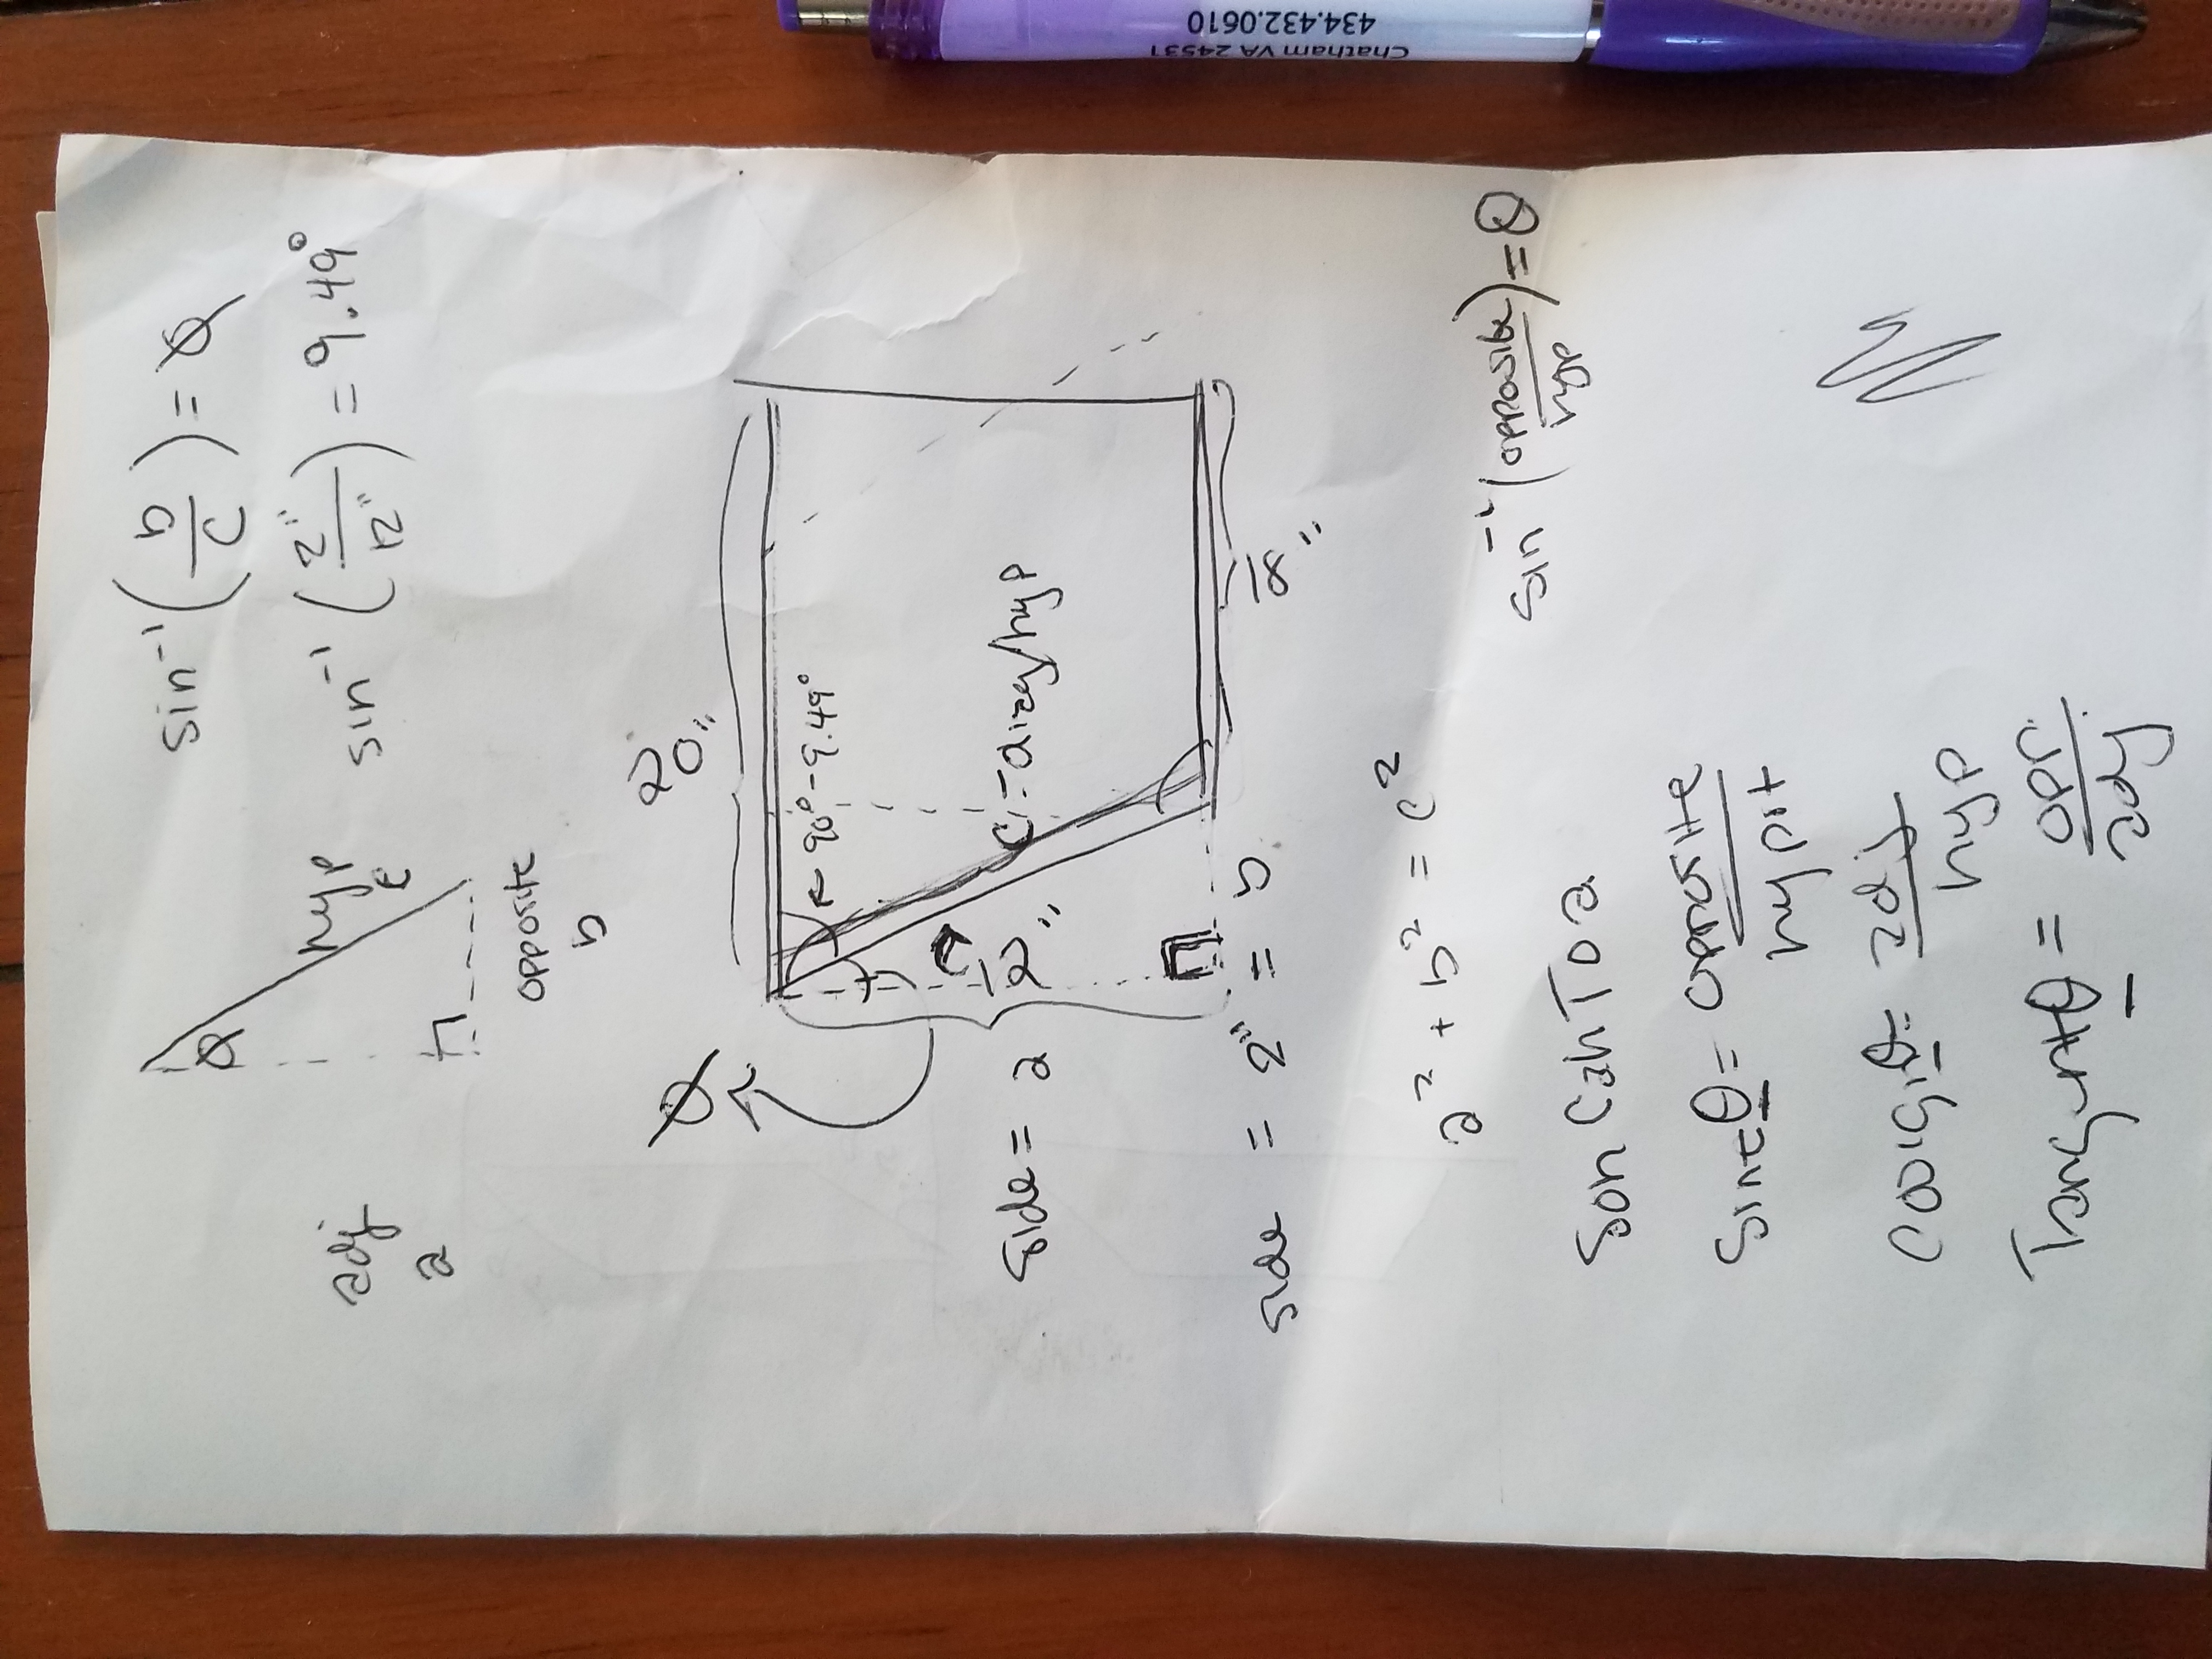 A paper showing calculations for the angle of the shelving and the needed cuts